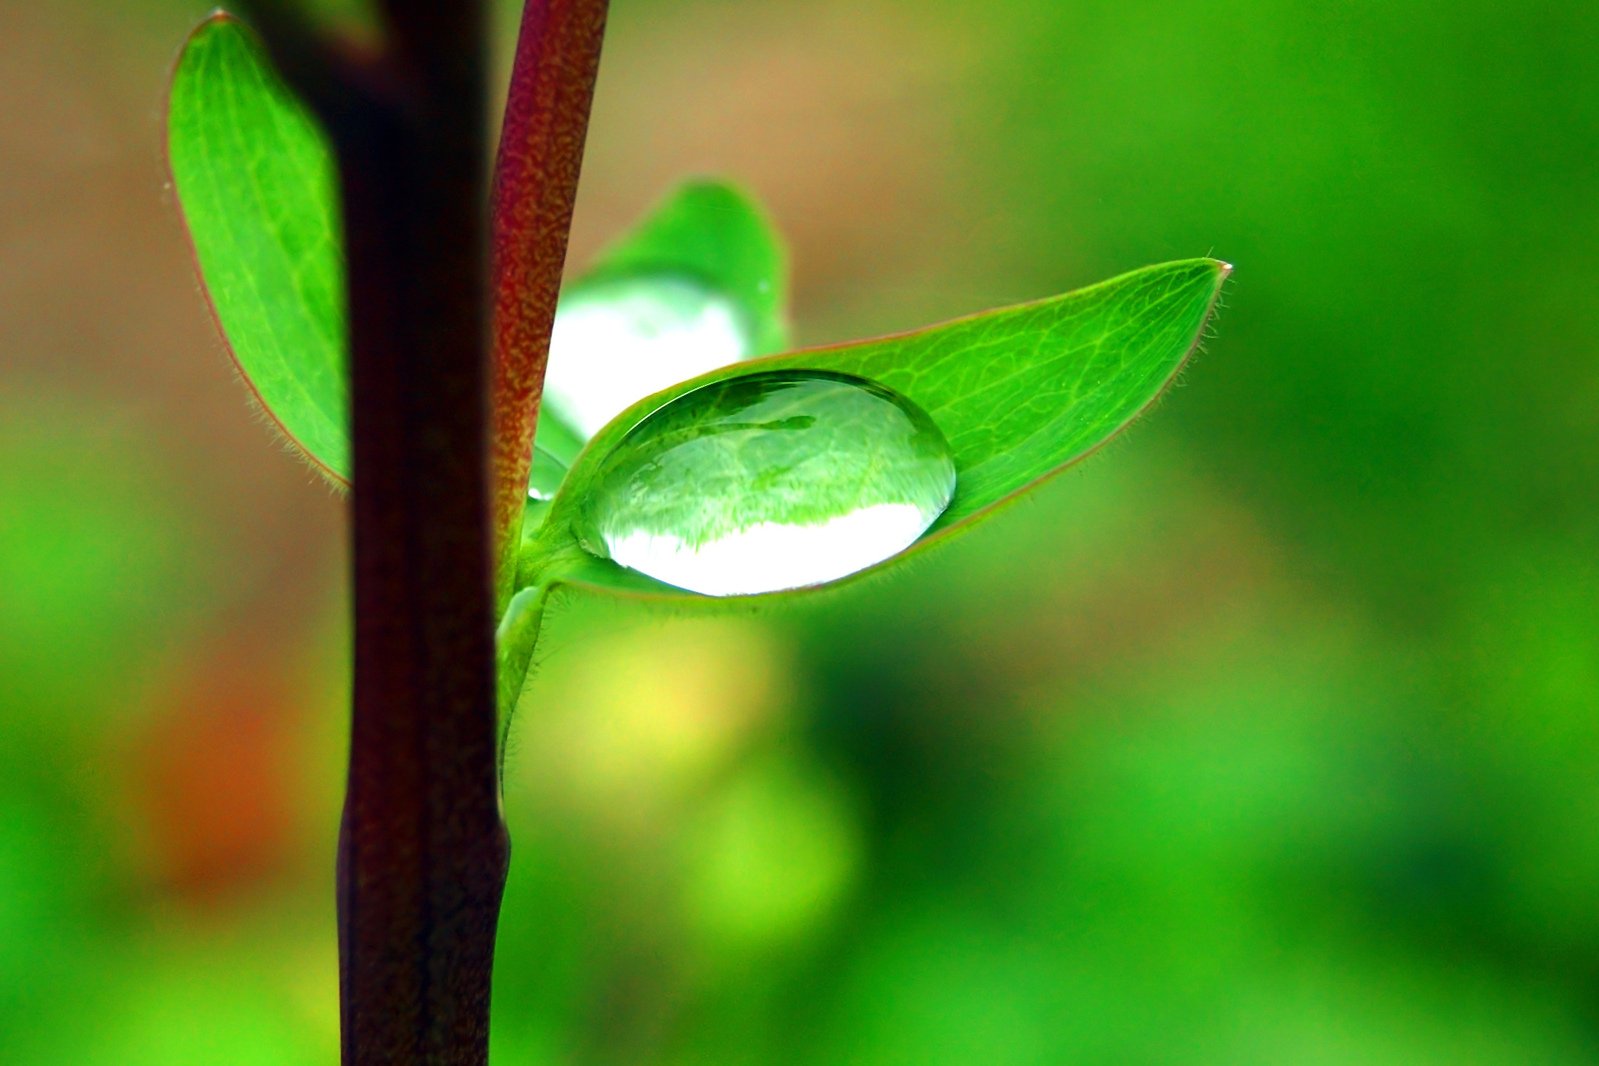 a green leaf with a drop on it in a blurry background